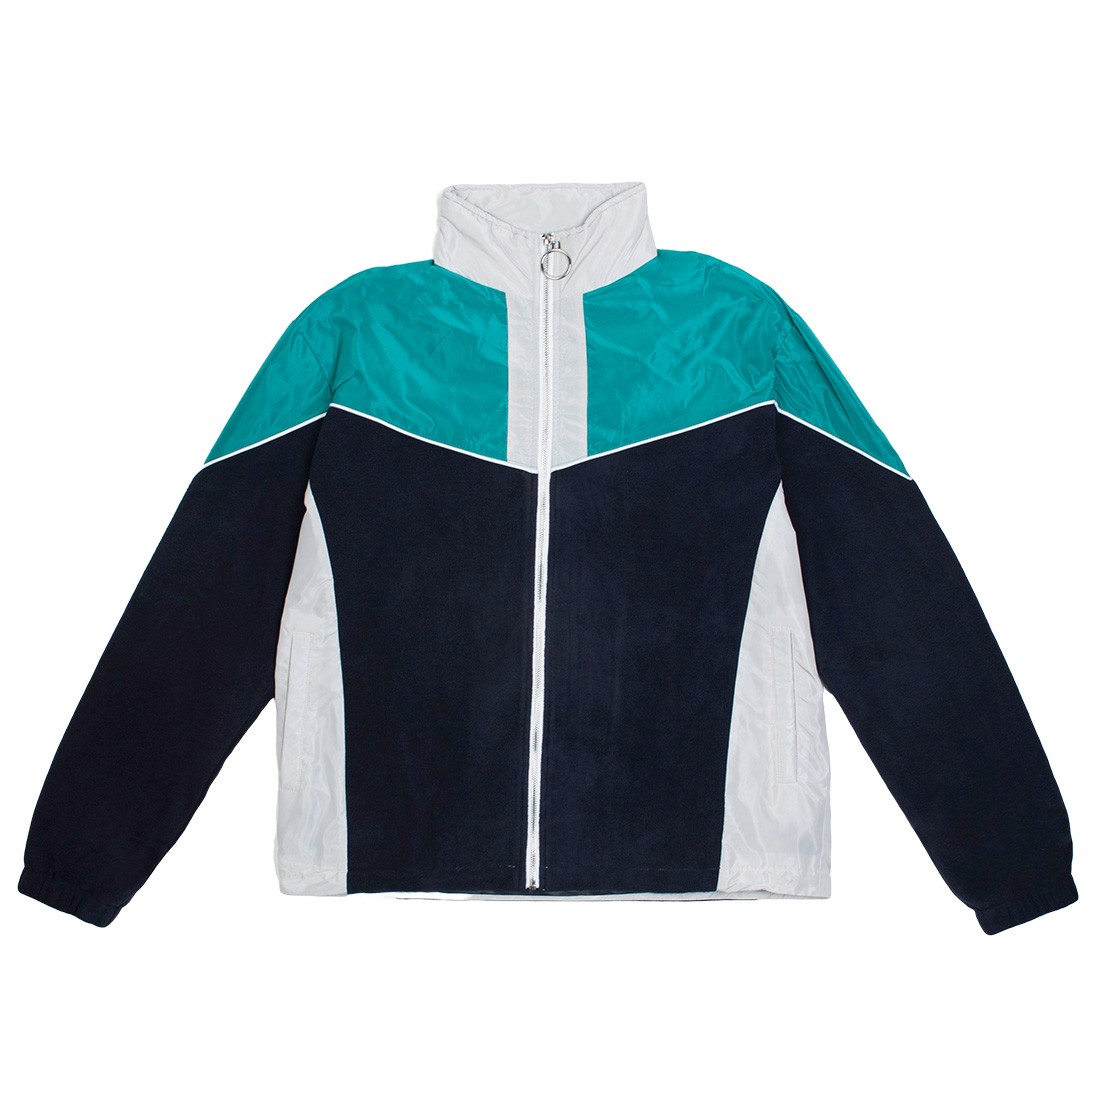 Lifted Anchors Men Madden Jacket (teal)